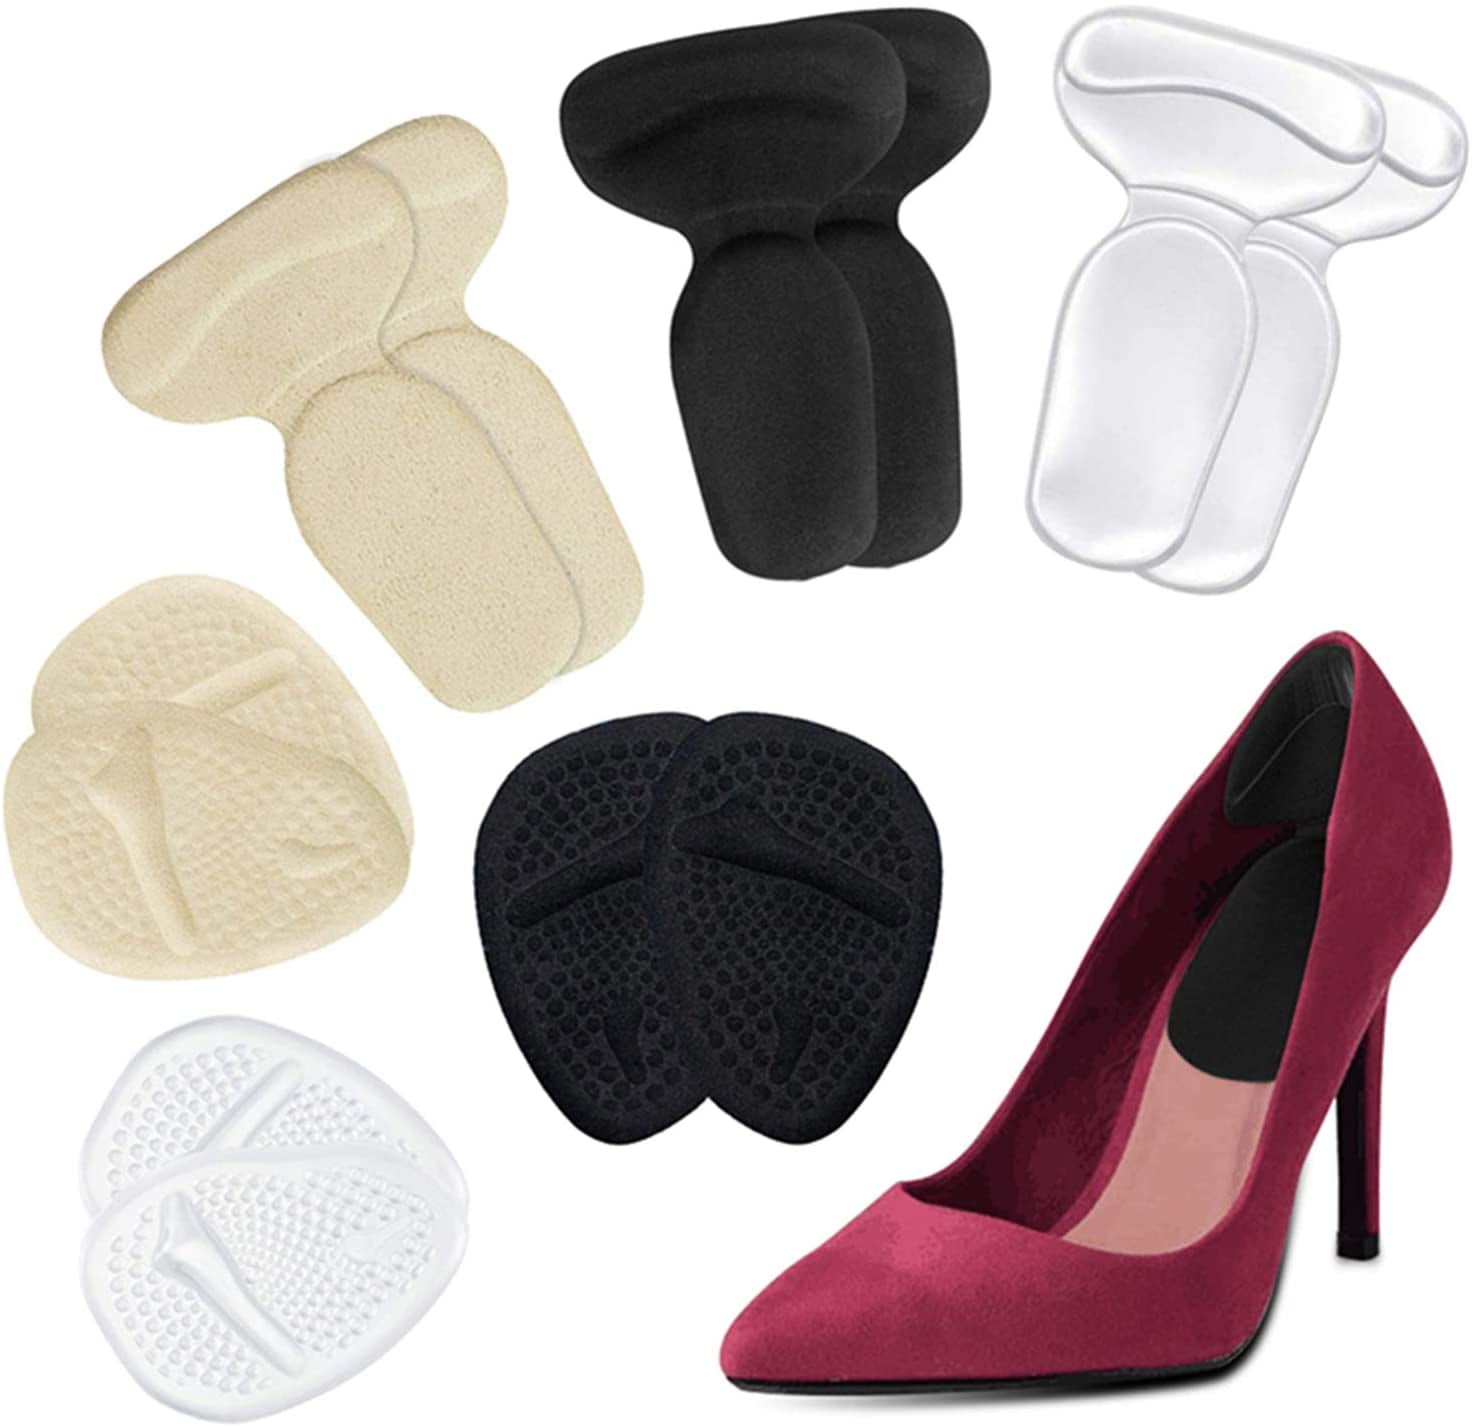 Foot Cushions Ladies High Heel Shoe Insole Comfort Sore Party Feet Sole Pad Soft 